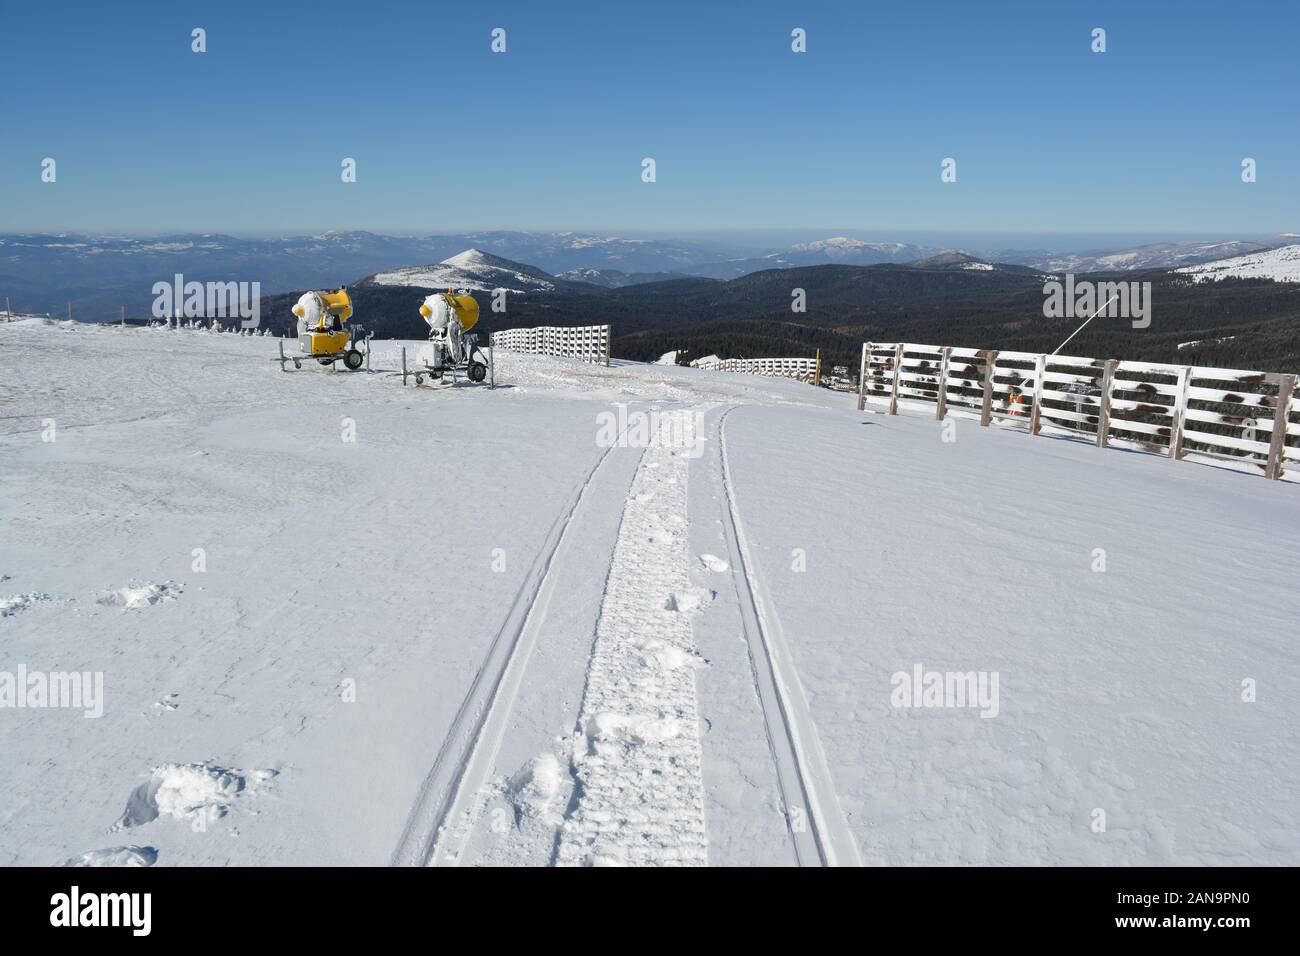 Snowmobile trail in fresh snow, snow cannons wooden fence in background and a few mountain peaks in the distance, Mt.Kopaonik, Serbia Stock Photo